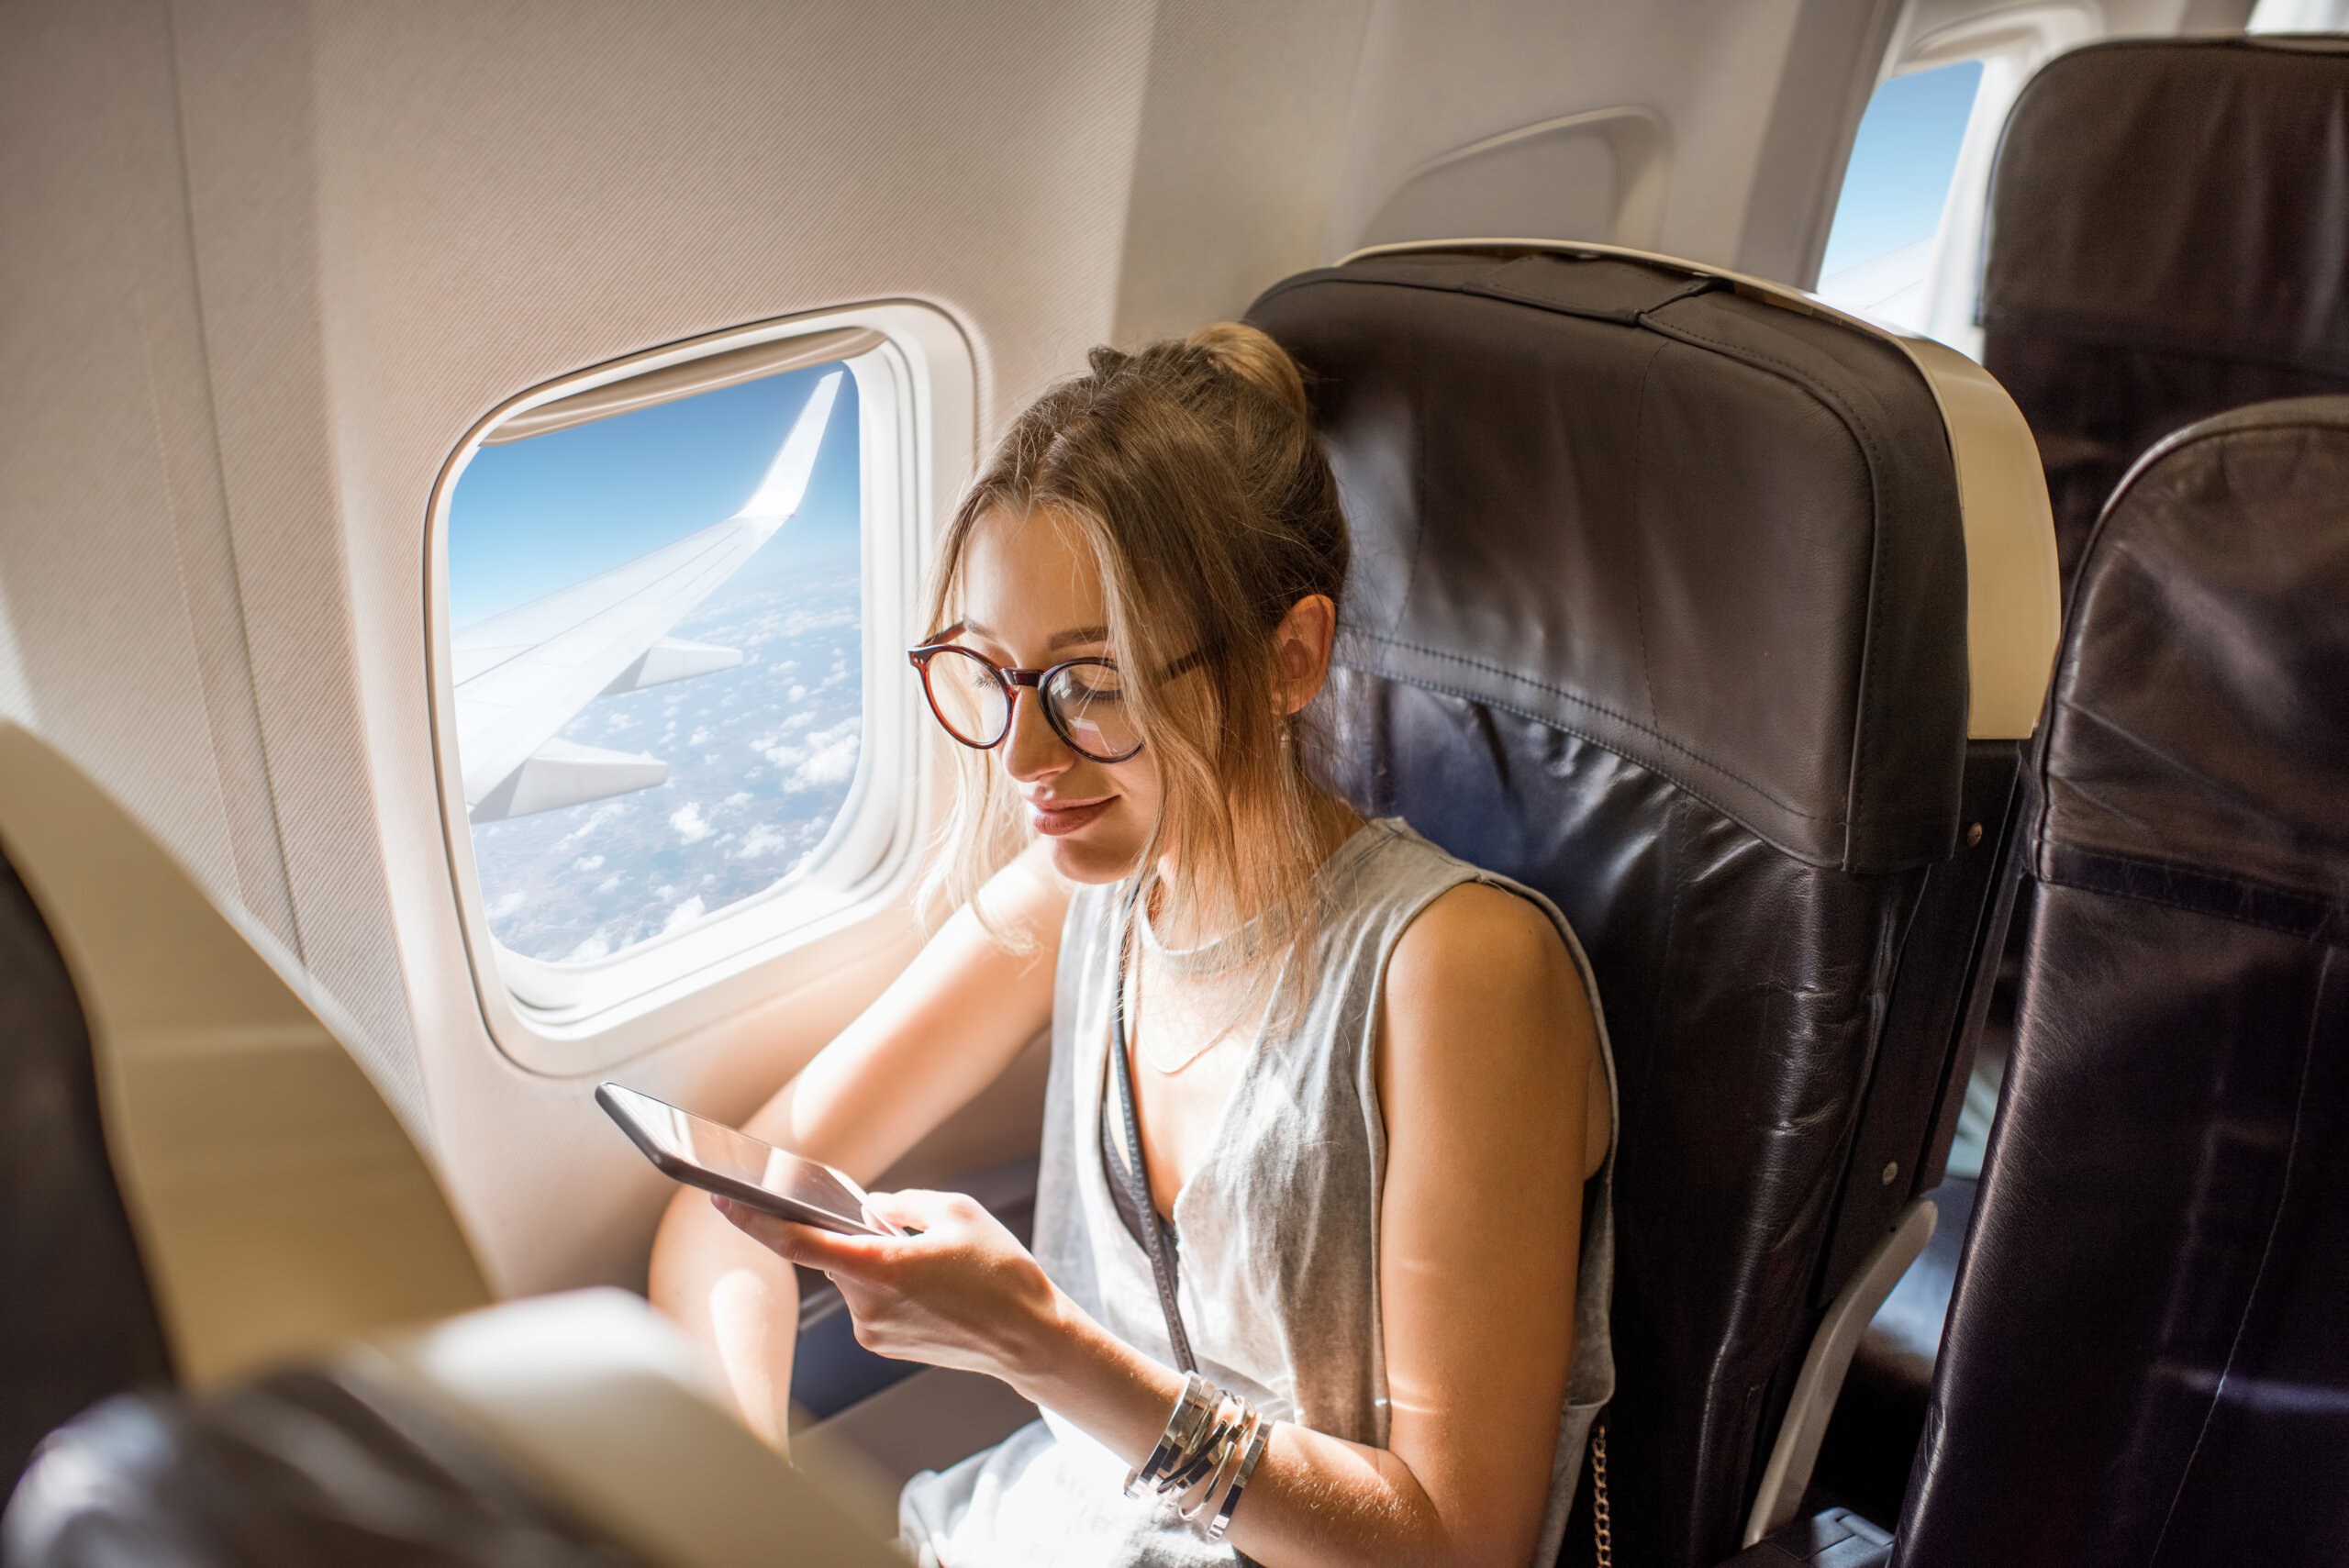 How to Avoid Back Pain on a Plane